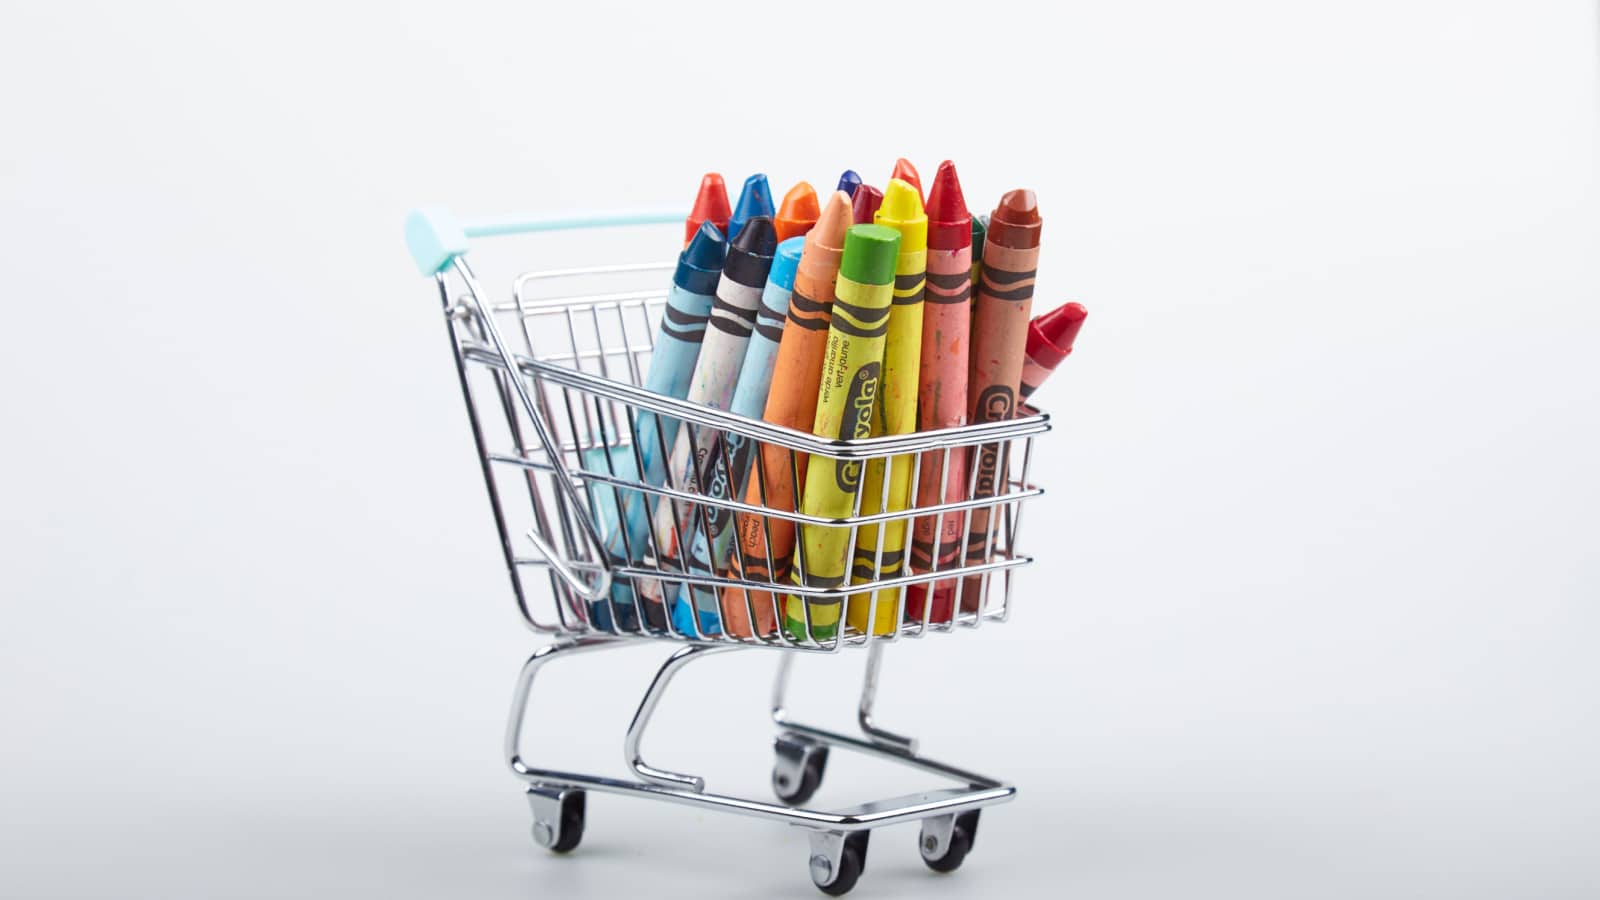 Mérida, Yucatan, México; 05-08-2022: Crayons in a shopping cart isolated on white background